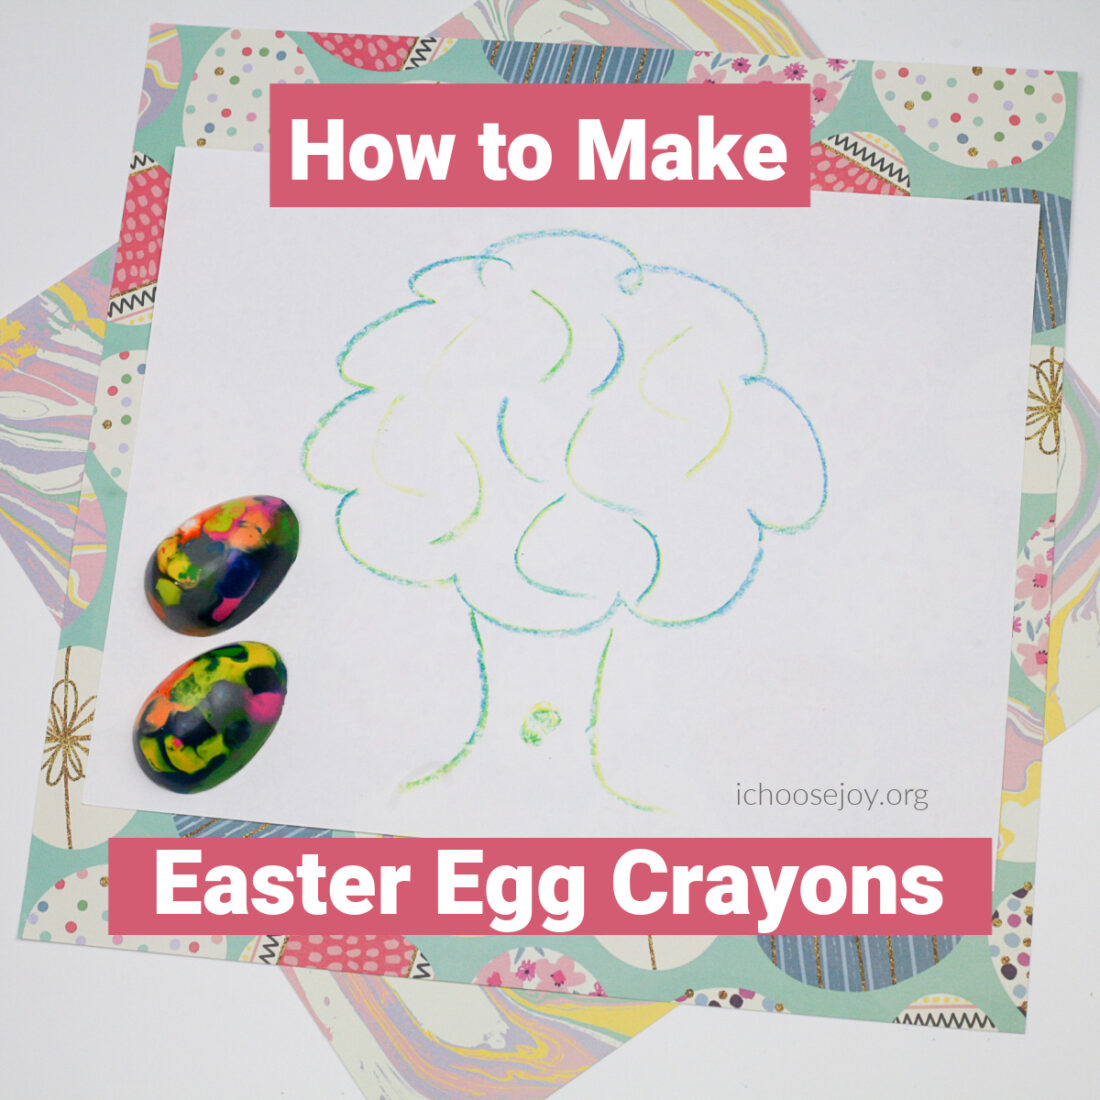 How to Make Easter Egg Crayons: A Fun and Easy Easter Craft